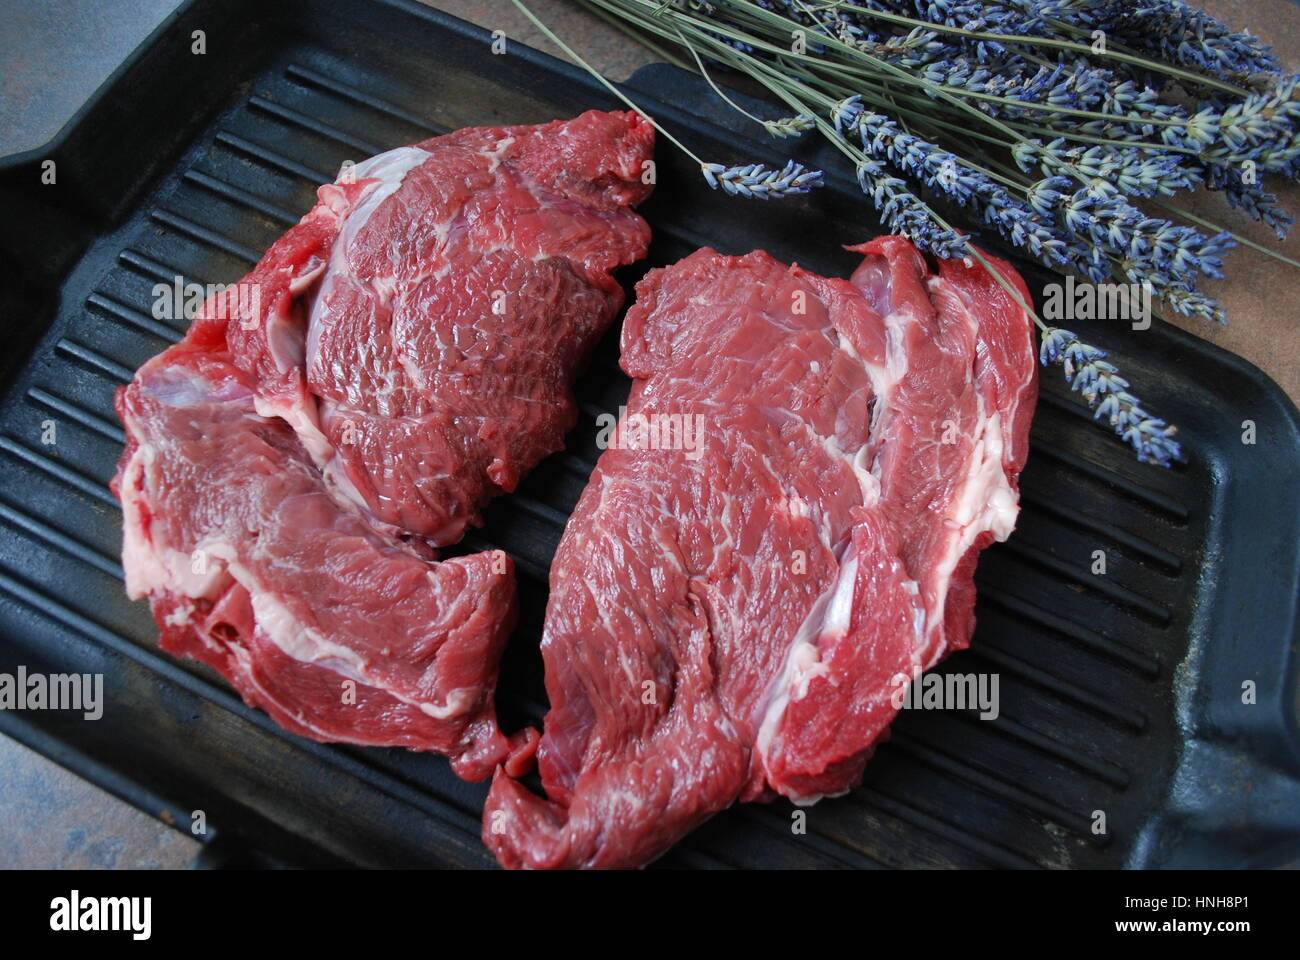 Fresh beef steak on a grill. Lavender branch on the background. Stock Photo